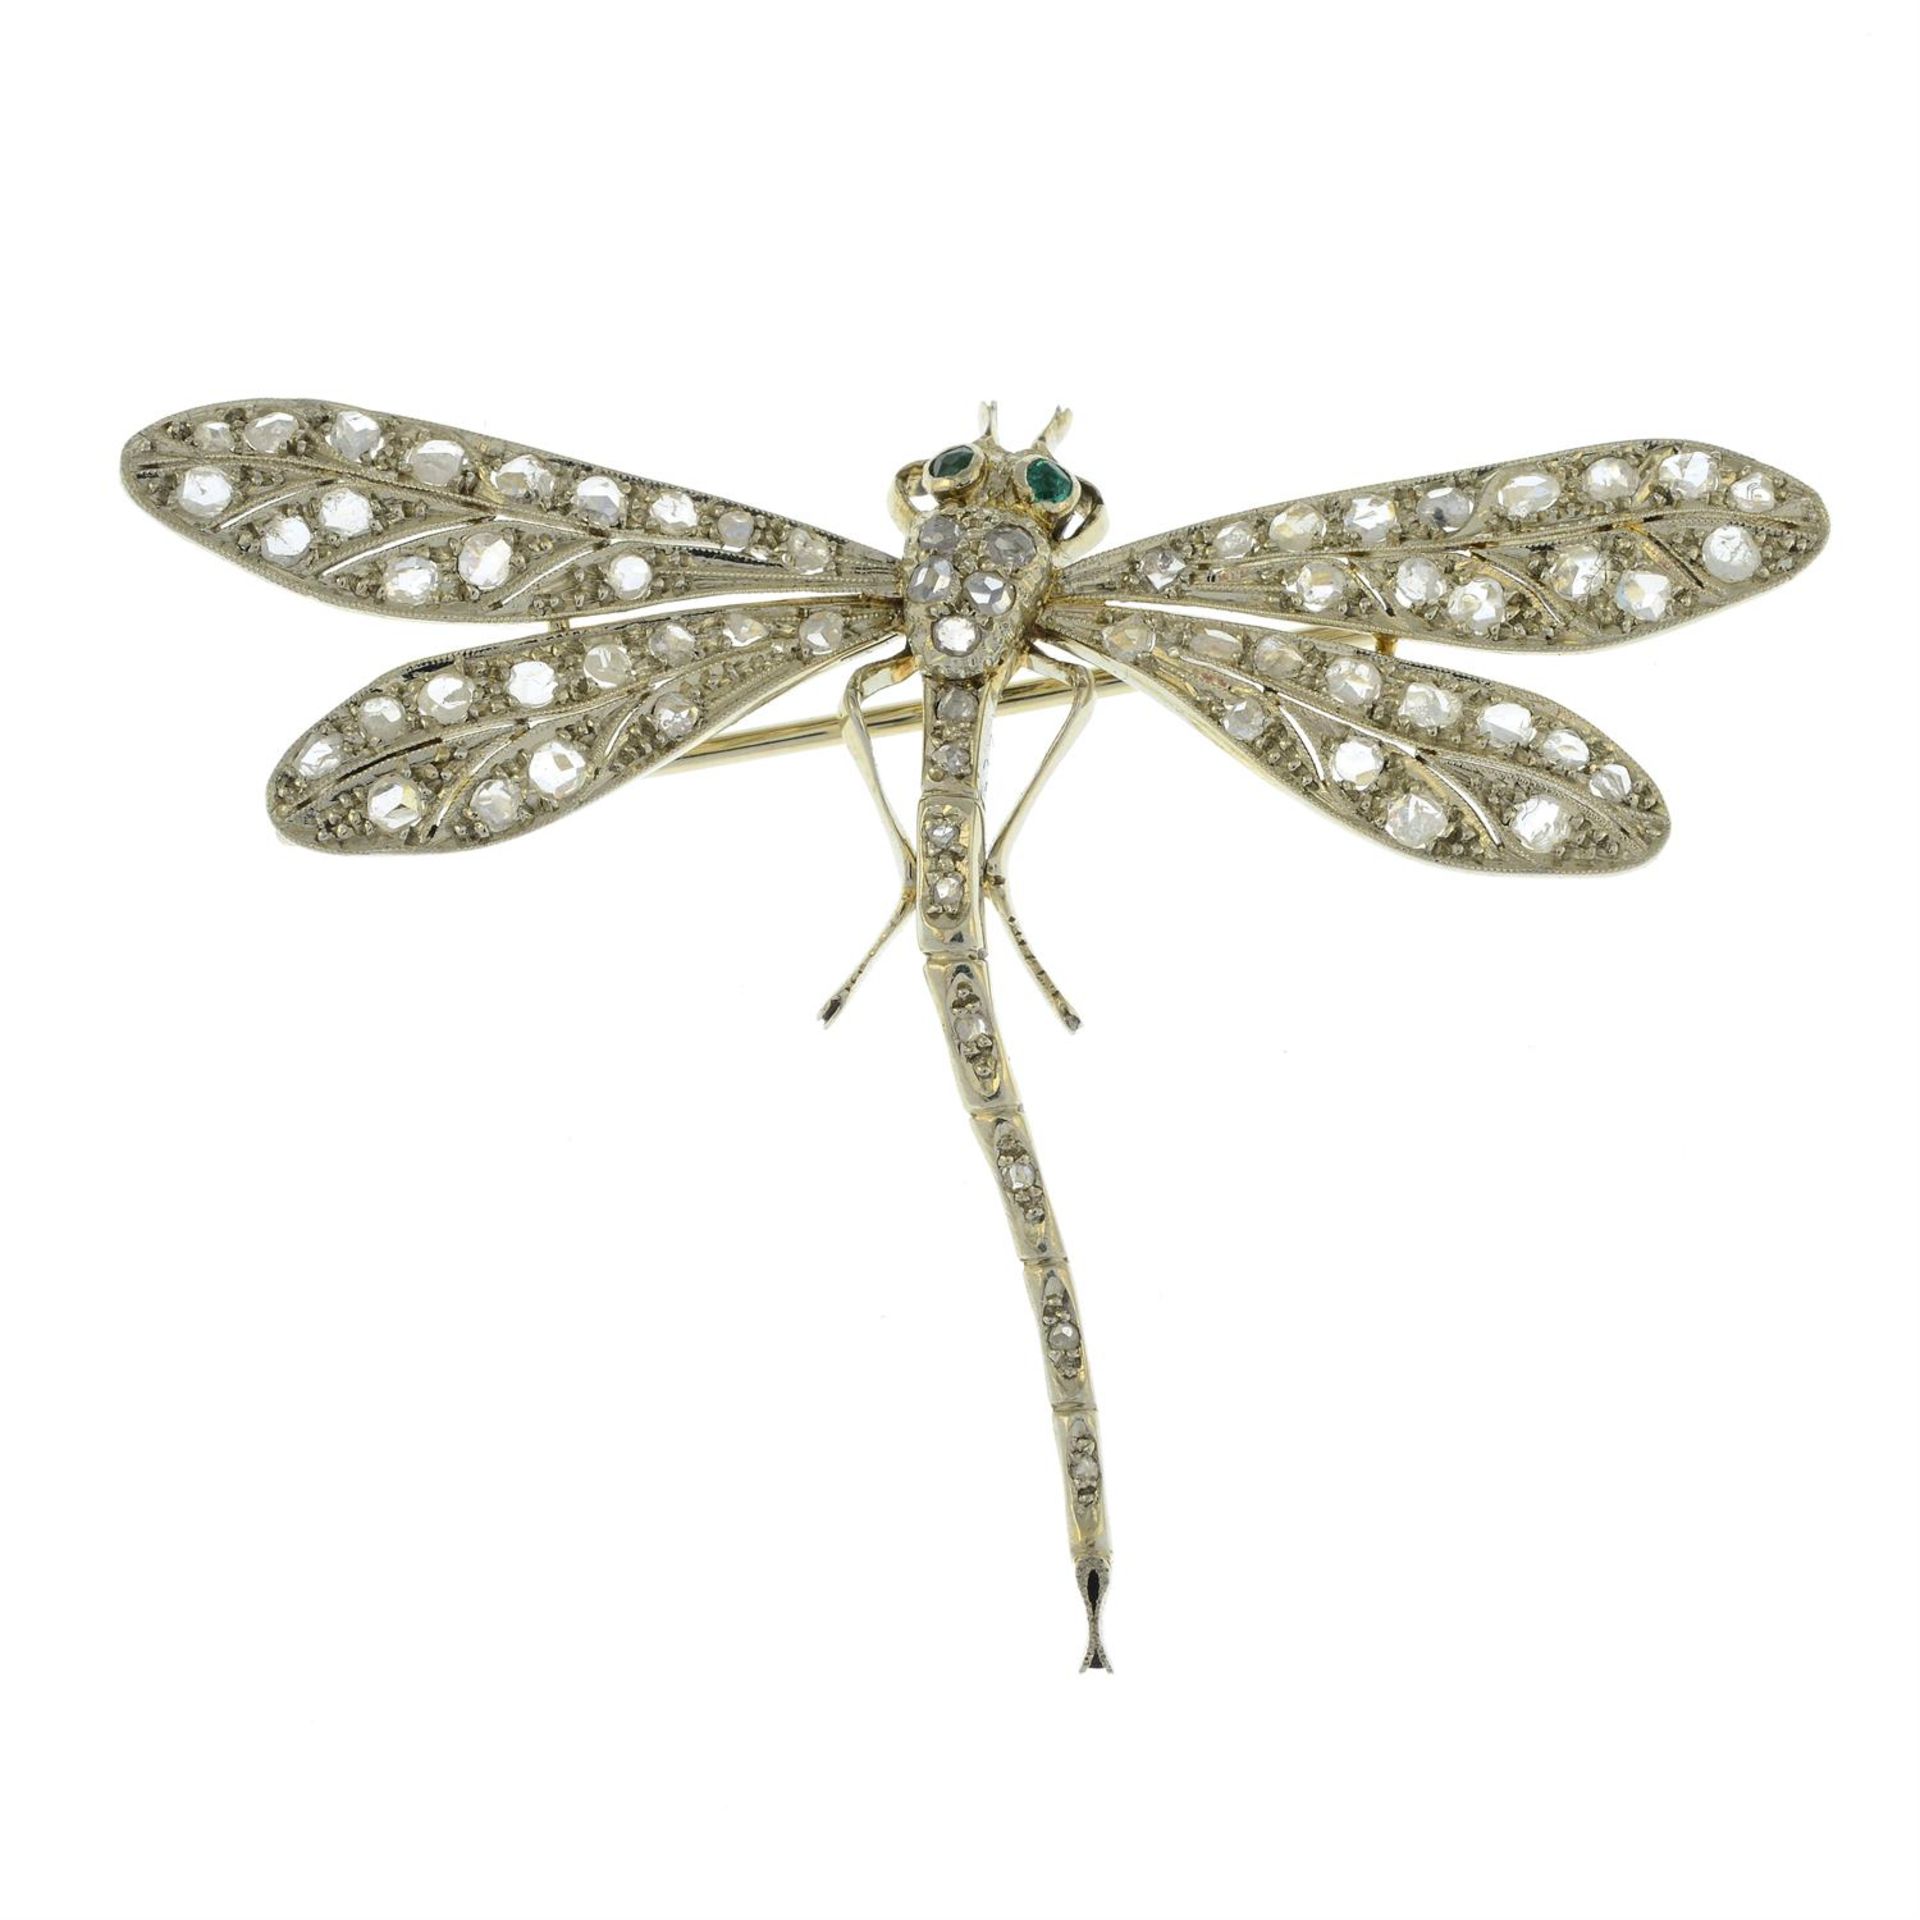 An early 20th century 18ct gold rose-cut diamond dragonfly brooch, with emerald eyes. - Image 2 of 4